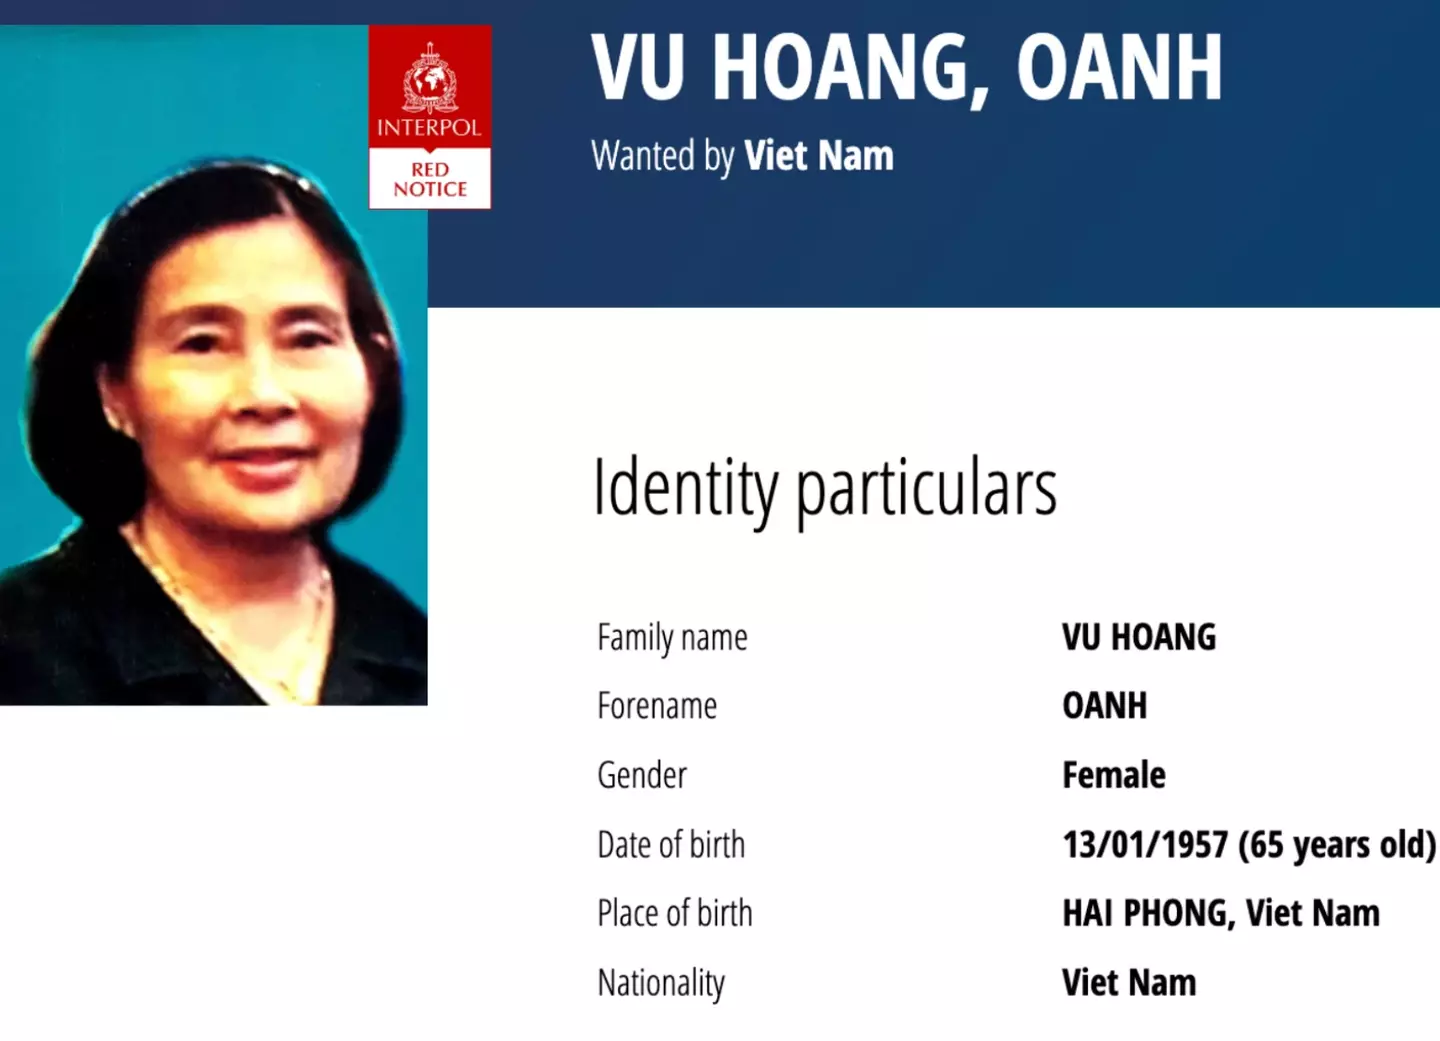 Vũ Hoàng Oanh managed to evade capture for years.